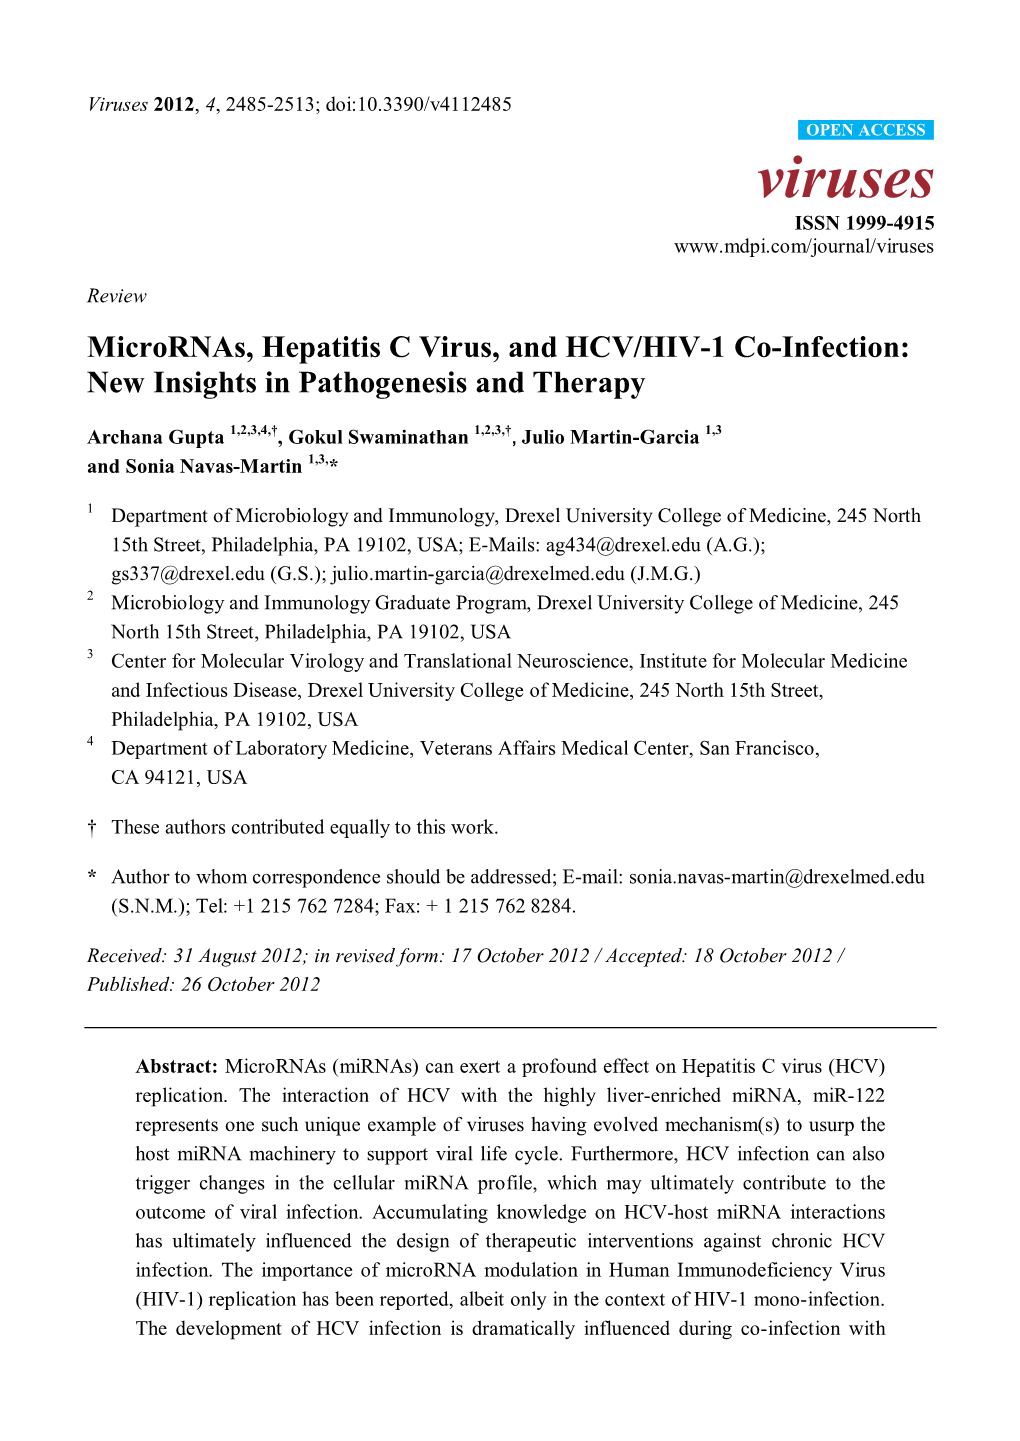 Micrornas, Hepatitis C Virus, and HCV/HIV-1 Co-Infection: New Insights in Pathogenesis and Therapy